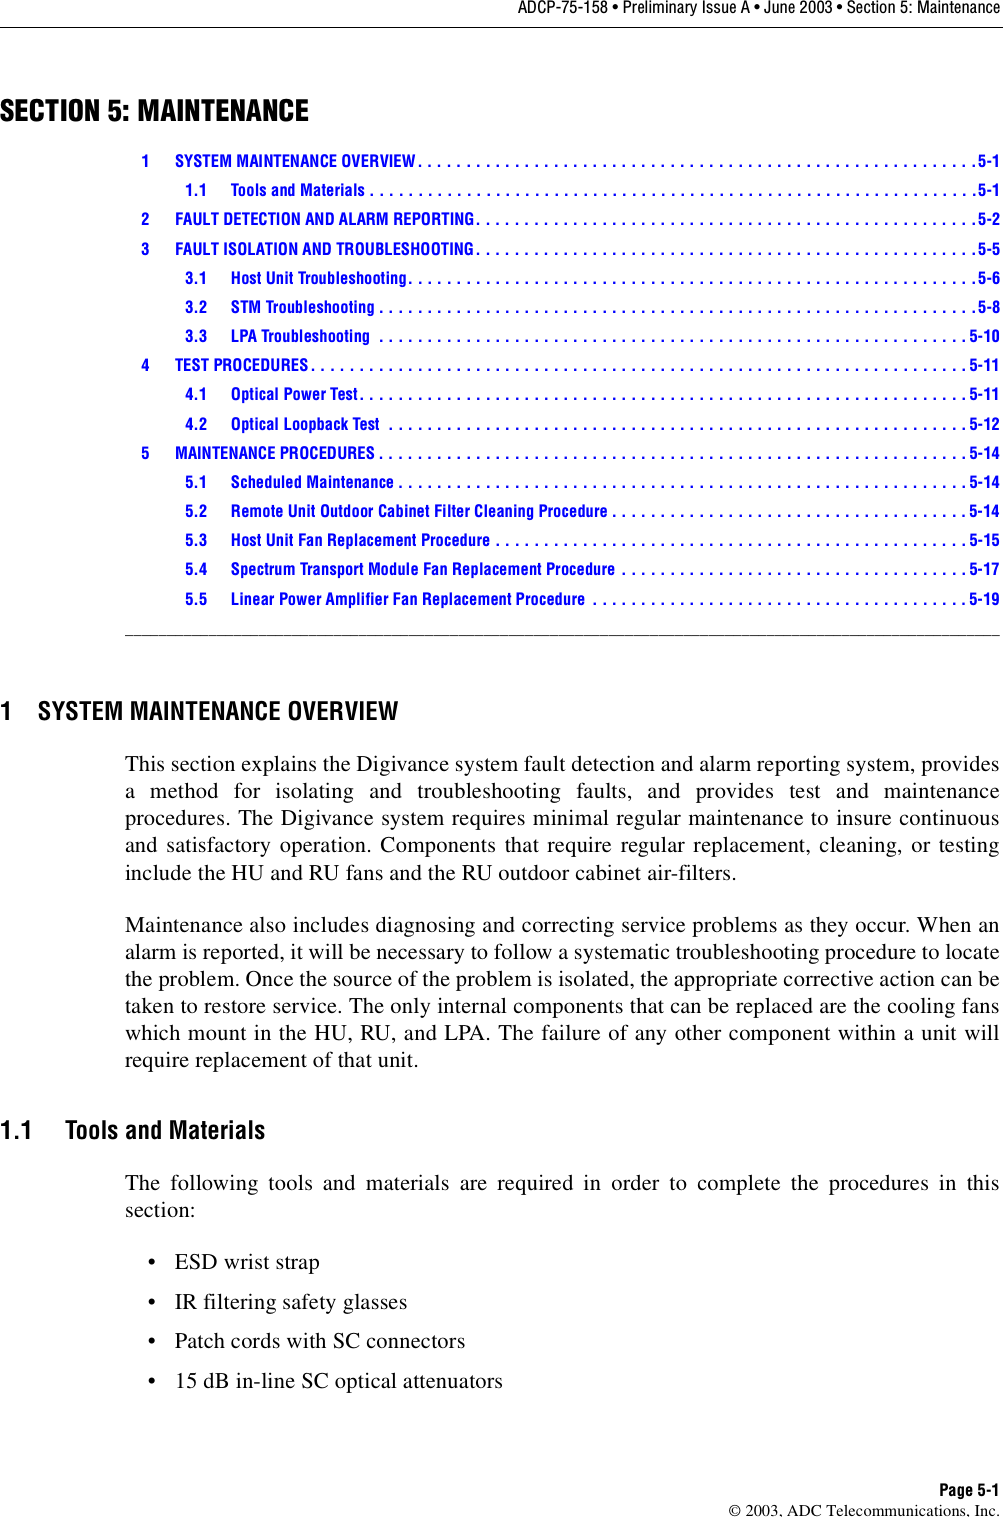 ADCP-75-158 • Preliminary Issue A • June 2003 • Section 5: MaintenancePage 5-1© 2003, ADC Telecommunications, Inc.SECTION 5: MAINTENANCE1 SYSTEM MAINTENANCE OVERVIEW . . . . . . . . . . . . . . . . . . . . . . . . . . . . . . . . . . . . . . . . . . . . . . . . . . . . . . . . . . 5-11.1 Tools and Materials . . . . . . . . . . . . . . . . . . . . . . . . . . . . . . . . . . . . . . . . . . . . . . . . . . . . . . . . . . . . . . .5-12 FAULT DETECTION AND ALARM REPORTING. . . . . . . . . . . . . . . . . . . . . . . . . . . . . . . . . . . . . . . . . . . . . . . . . . . .5-23 FAULT ISOLATION AND TROUBLESHOOTING. . . . . . . . . . . . . . . . . . . . . . . . . . . . . . . . . . . . . . . . . . . . . . . . . . . .5-53.1 Host Unit Troubleshooting. . . . . . . . . . . . . . . . . . . . . . . . . . . . . . . . . . . . . . . . . . . . . . . . . . . . . . . . . . .5-63.2 STM Troubleshooting . . . . . . . . . . . . . . . . . . . . . . . . . . . . . . . . . . . . . . . . . . . . . . . . . . . . . . . . . . . . . .5-83.3 LPA Troubleshooting  . . . . . . . . . . . . . . . . . . . . . . . . . . . . . . . . . . . . . . . . . . . . . . . . . . . . . . . . . . . . . 5-104 TEST PROCEDURES. . . . . . . . . . . . . . . . . . . . . . . . . . . . . . . . . . . . . . . . . . . . . . . . . . . . . . . . . . . . . . . . . . . . 5-114.1 Optical Power Test. . . . . . . . . . . . . . . . . . . . . . . . . . . . . . . . . . . . . . . . . . . . . . . . . . . . . . . . . . . . . . . 5-114.2 Optical Loopback Test  . . . . . . . . . . . . . . . . . . . . . . . . . . . . . . . . . . . . . . . . . . . . . . . . . . . . . . . . . . . . 5-125 MAINTENANCE PROCEDURES . . . . . . . . . . . . . . . . . . . . . . . . . . . . . . . . . . . . . . . . . . . . . . . . . . . . . . . . . . . . . 5-145.1 Scheduled Maintenance . . . . . . . . . . . . . . . . . . . . . . . . . . . . . . . . . . . . . . . . . . . . . . . . . . . . . . . . . . . 5-145.2 Remote Unit Outdoor Cabinet Filter Cleaning Procedure . . . . . . . . . . . . . . . . . . . . . . . . . . . . . . . . . . . . .5-145.3 Host Unit Fan Replacement Procedure . . . . . . . . . . . . . . . . . . . . . . . . . . . . . . . . . . . . . . . . . . . . . . . . . 5-155.4 Spectrum Transport Module Fan Replacement Procedure . . . . . . . . . . . . . . . . . . . . . . . . . . . . . . . . . . . . 5-175.5 Linear Power Amplifier Fan Replacement Procedure  . . . . . . . . . . . . . . . . . . . . . . . . . . . . . . . . . . . . . . .5-19_________________________________________________________________________________________________________1 SYSTEM MAINTENANCE OVERVIEWThis section explains the Digivance system fault detection and alarm reporting system, providesa method for isolating and troubleshooting faults, and provides test and maintenanceprocedures. The Digivance system requires minimal regular maintenance to insure continuousand satisfactory operation. Components that require regular replacement, cleaning, or testinginclude the HU and RU fans and the RU outdoor cabinet air-filters.Maintenance also includes diagnosing and correcting service problems as they occur. When analarm is reported, it will be necessary to follow a systematic troubleshooting procedure to locatethe problem. Once the source of the problem is isolated, the appropriate corrective action can betaken to restore service. The only internal components that can be replaced are the cooling fanswhich mount in the HU, RU, and LPA. The failure of any other component within a unit willrequire replacement of that unit. 1.1 Tools and MaterialsThe following tools and materials are required in order to complete the procedures in thissection: •ESD wrist strap• IR filtering safety glasses• Patch cords with SC connectors• 15 dB in-line SC optical attenuators